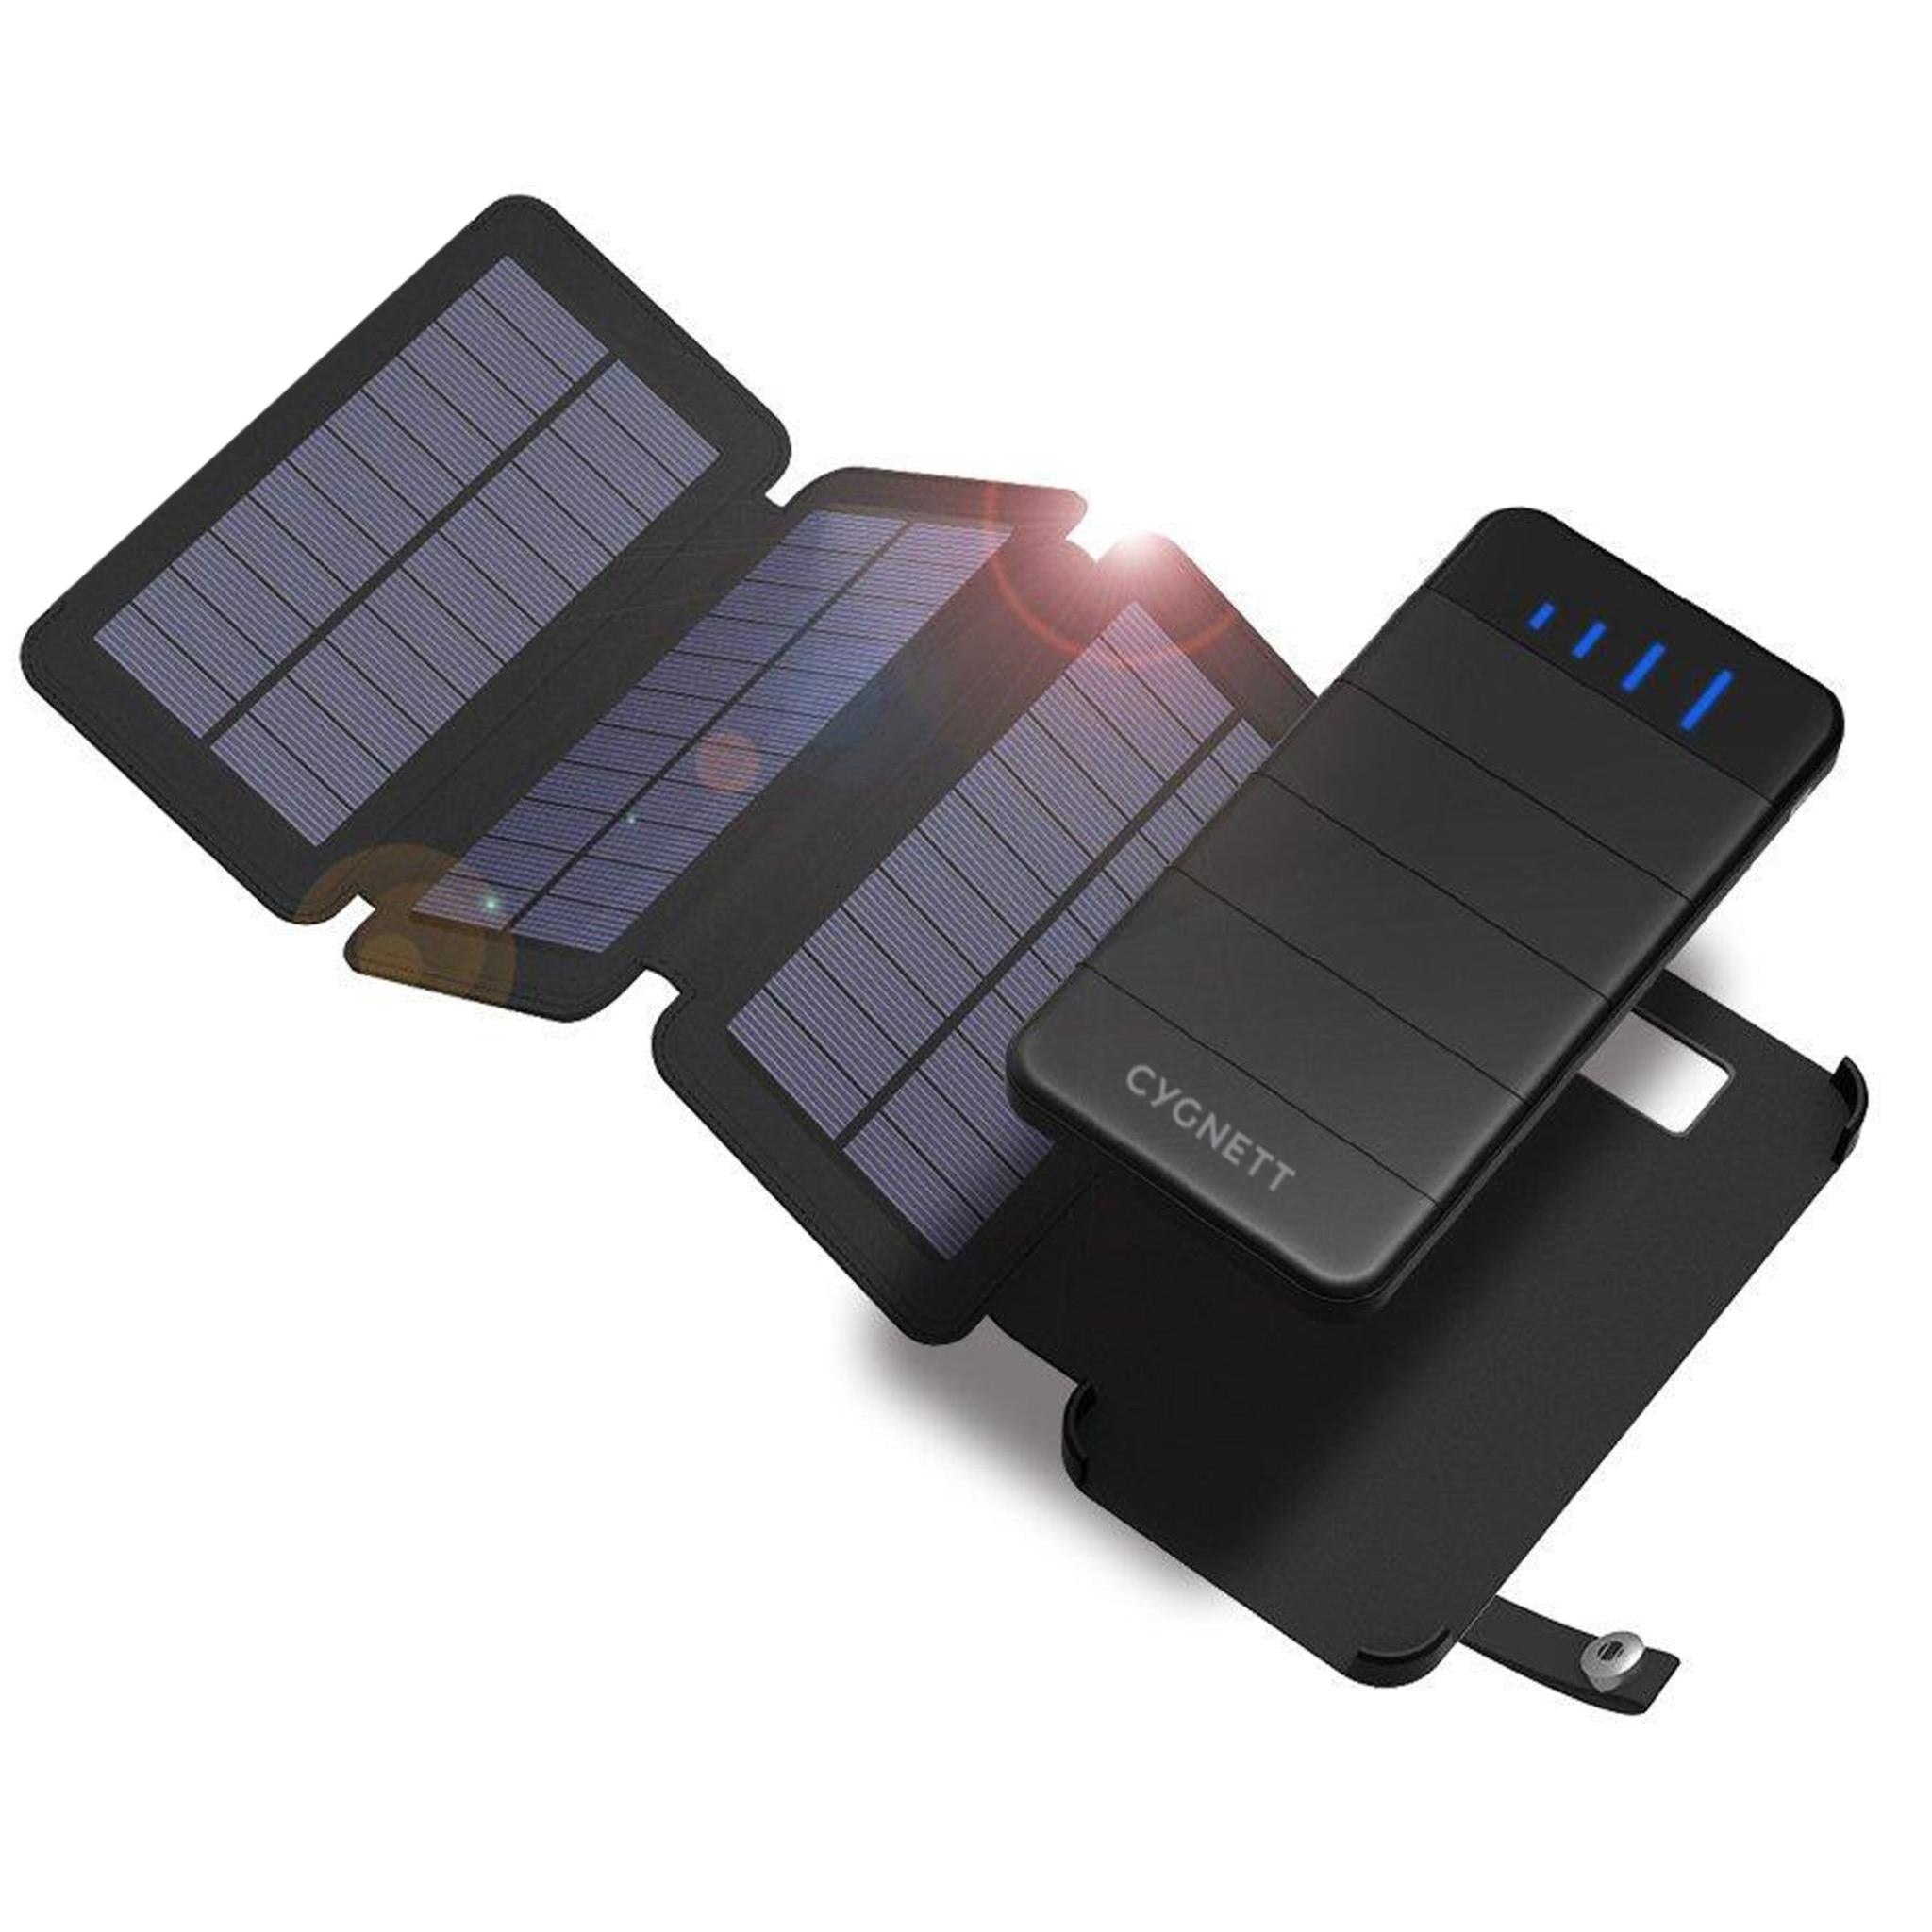 Cygnett ChargeUp Explorer 8K Portable Power Bank with Solar Panels